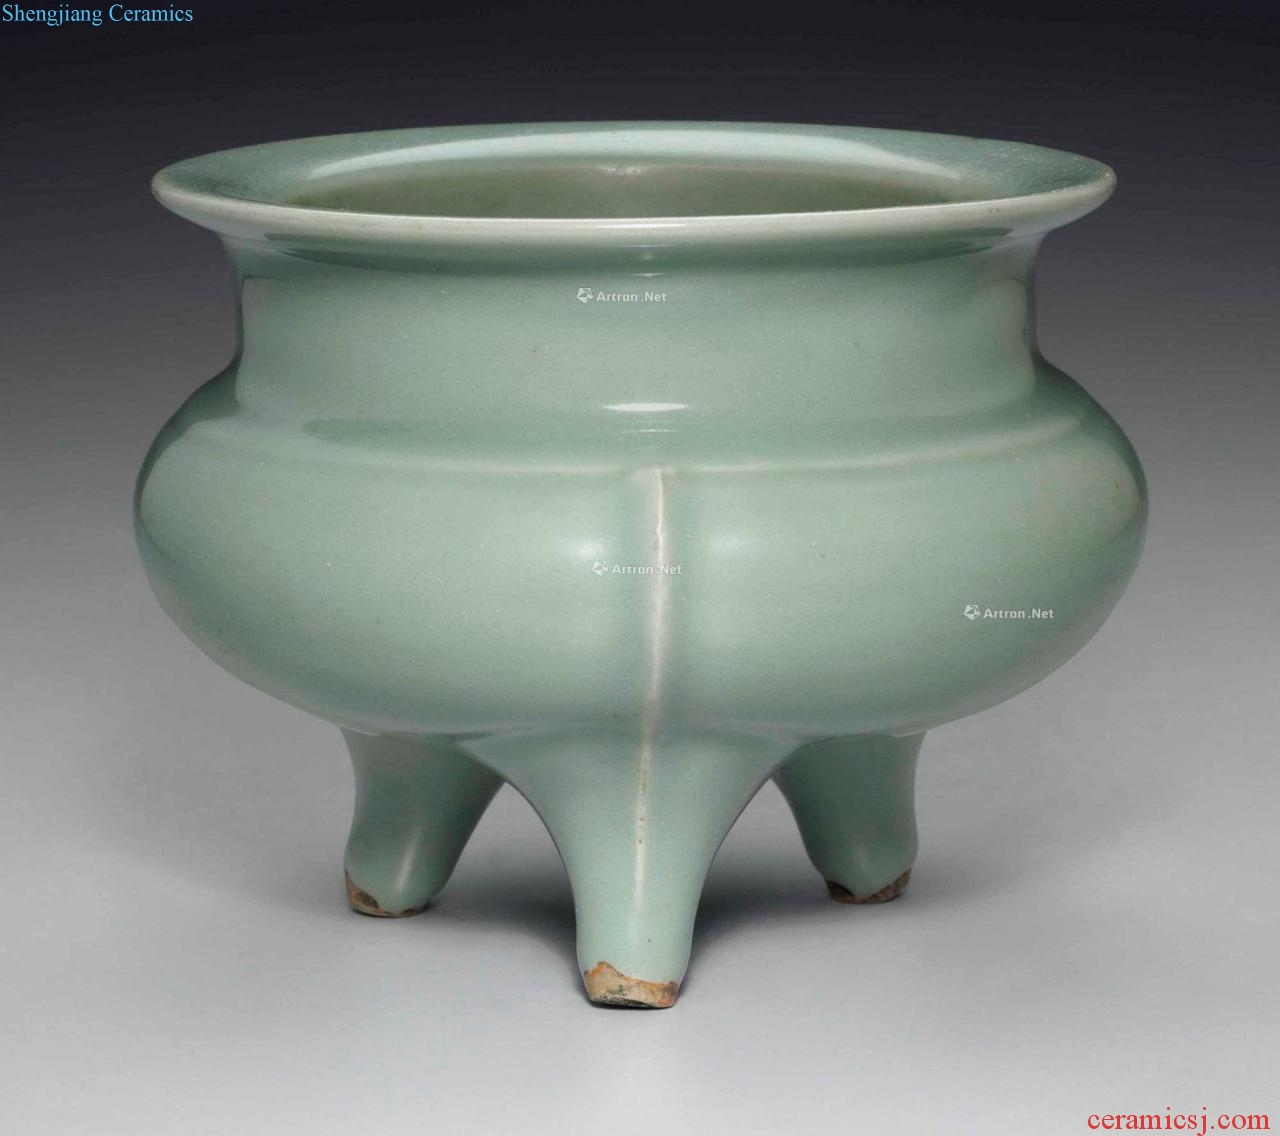 The southern song dynasty (1127-1279) A LONGQUAN CELADON TRIPOD CENSER